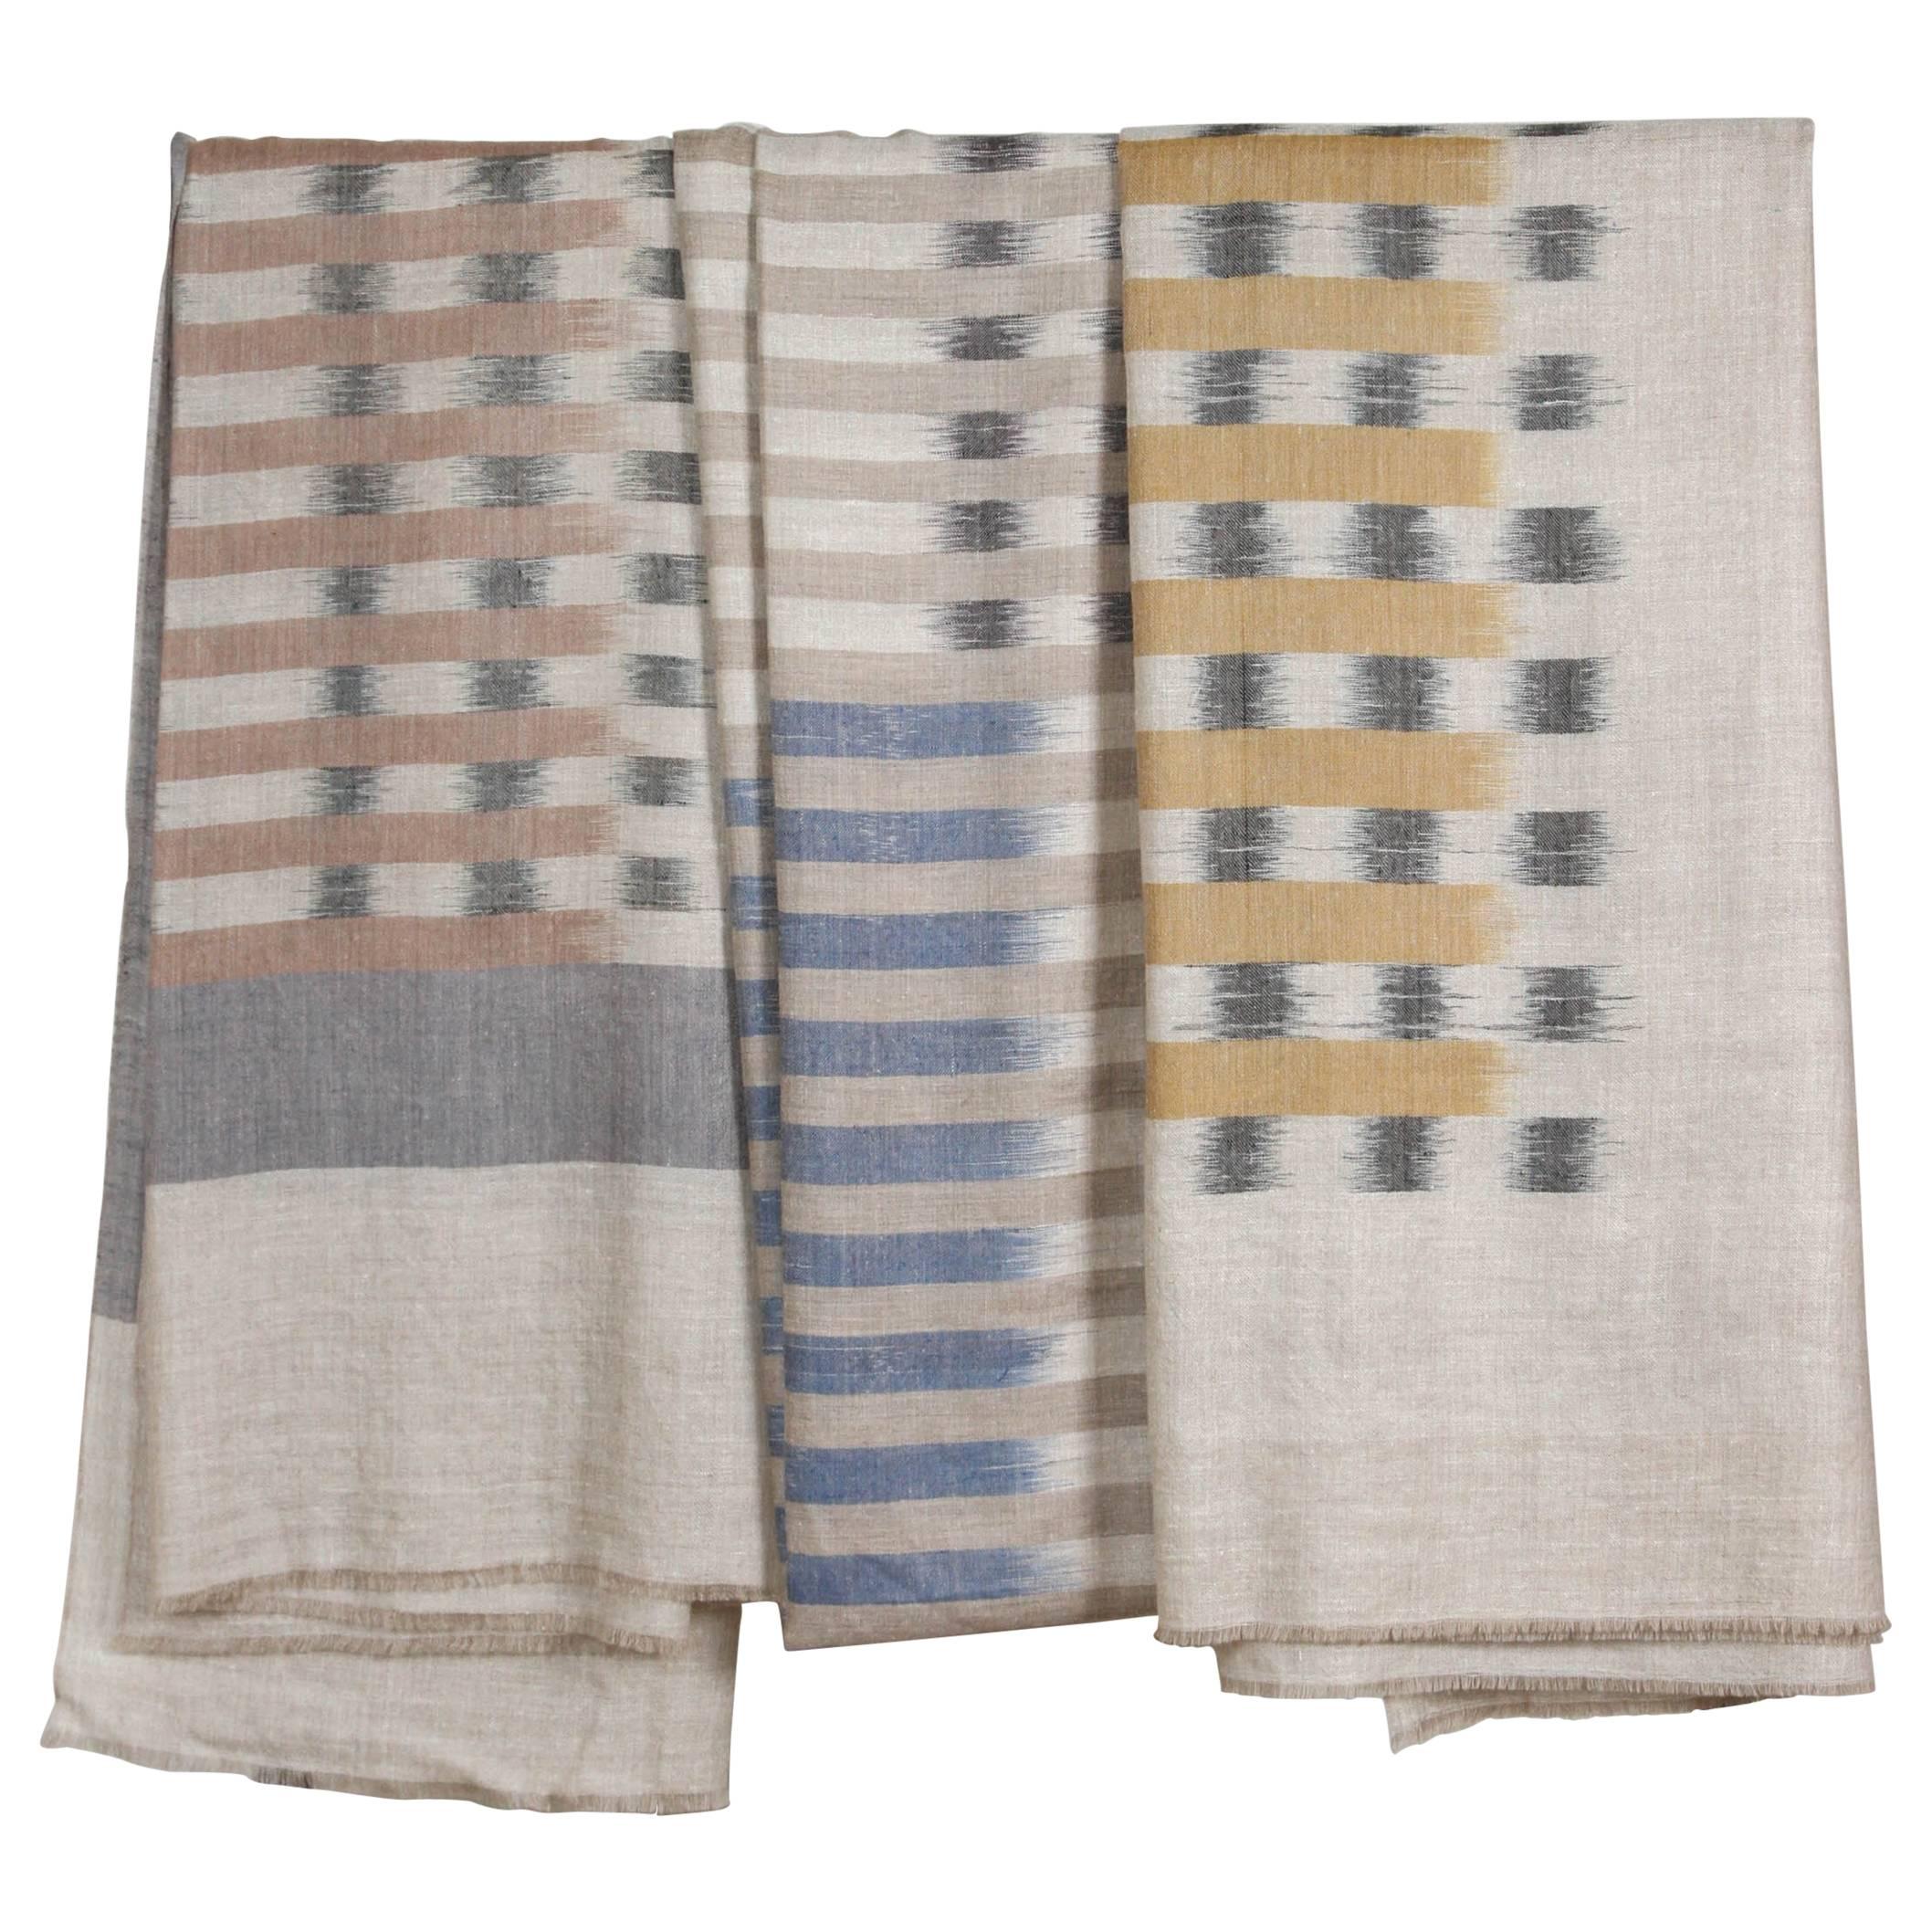 Oversize Cashmere Woven Ikat Throws or Shawls For Sale